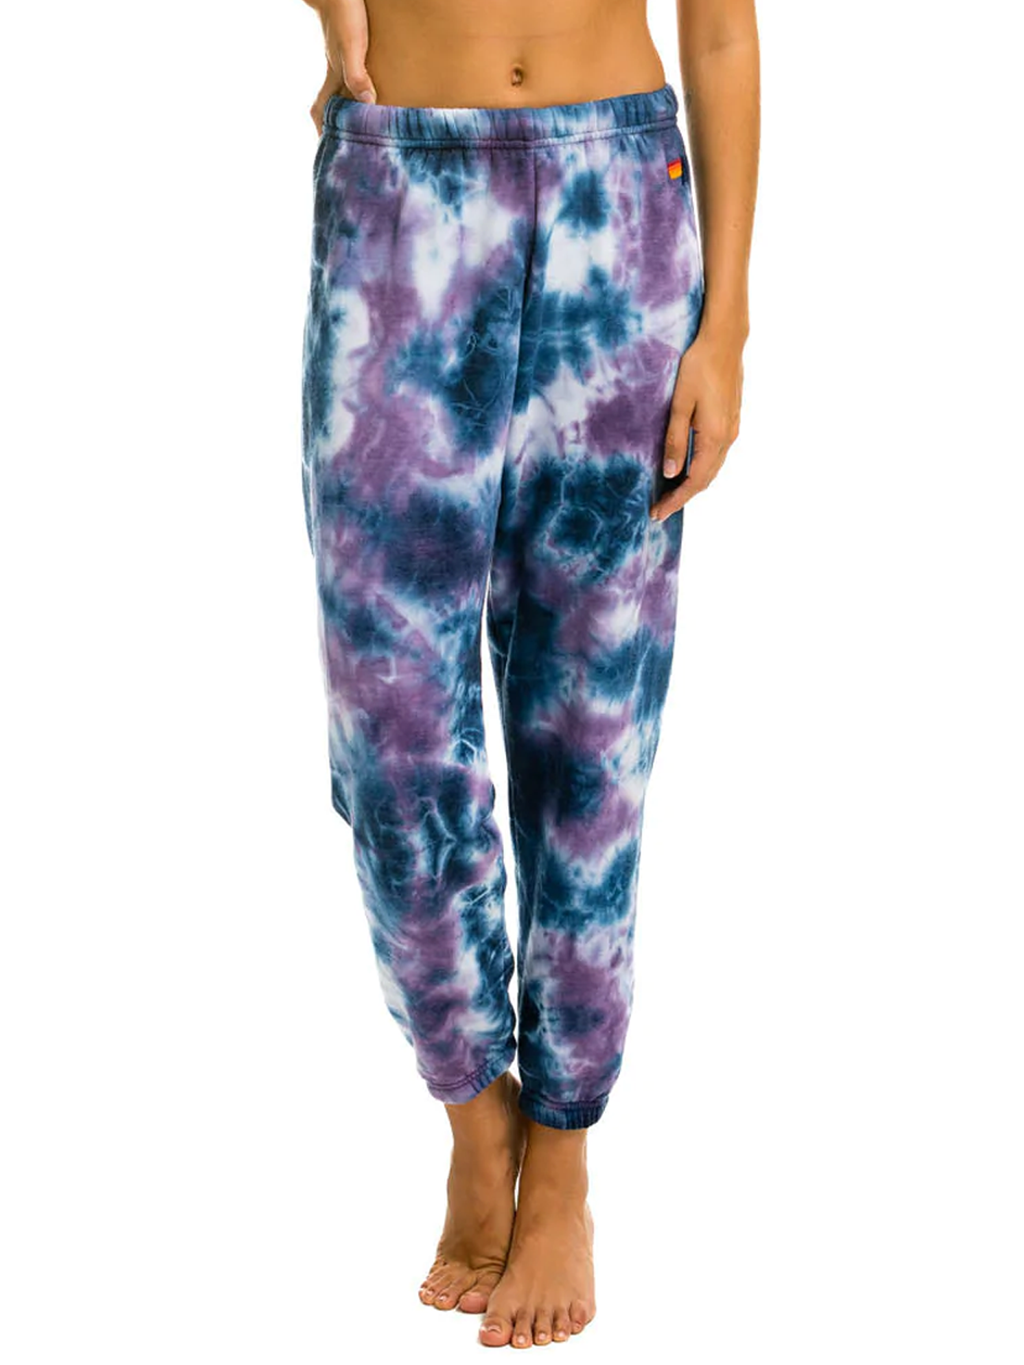 Hand Dyed Sweatpants